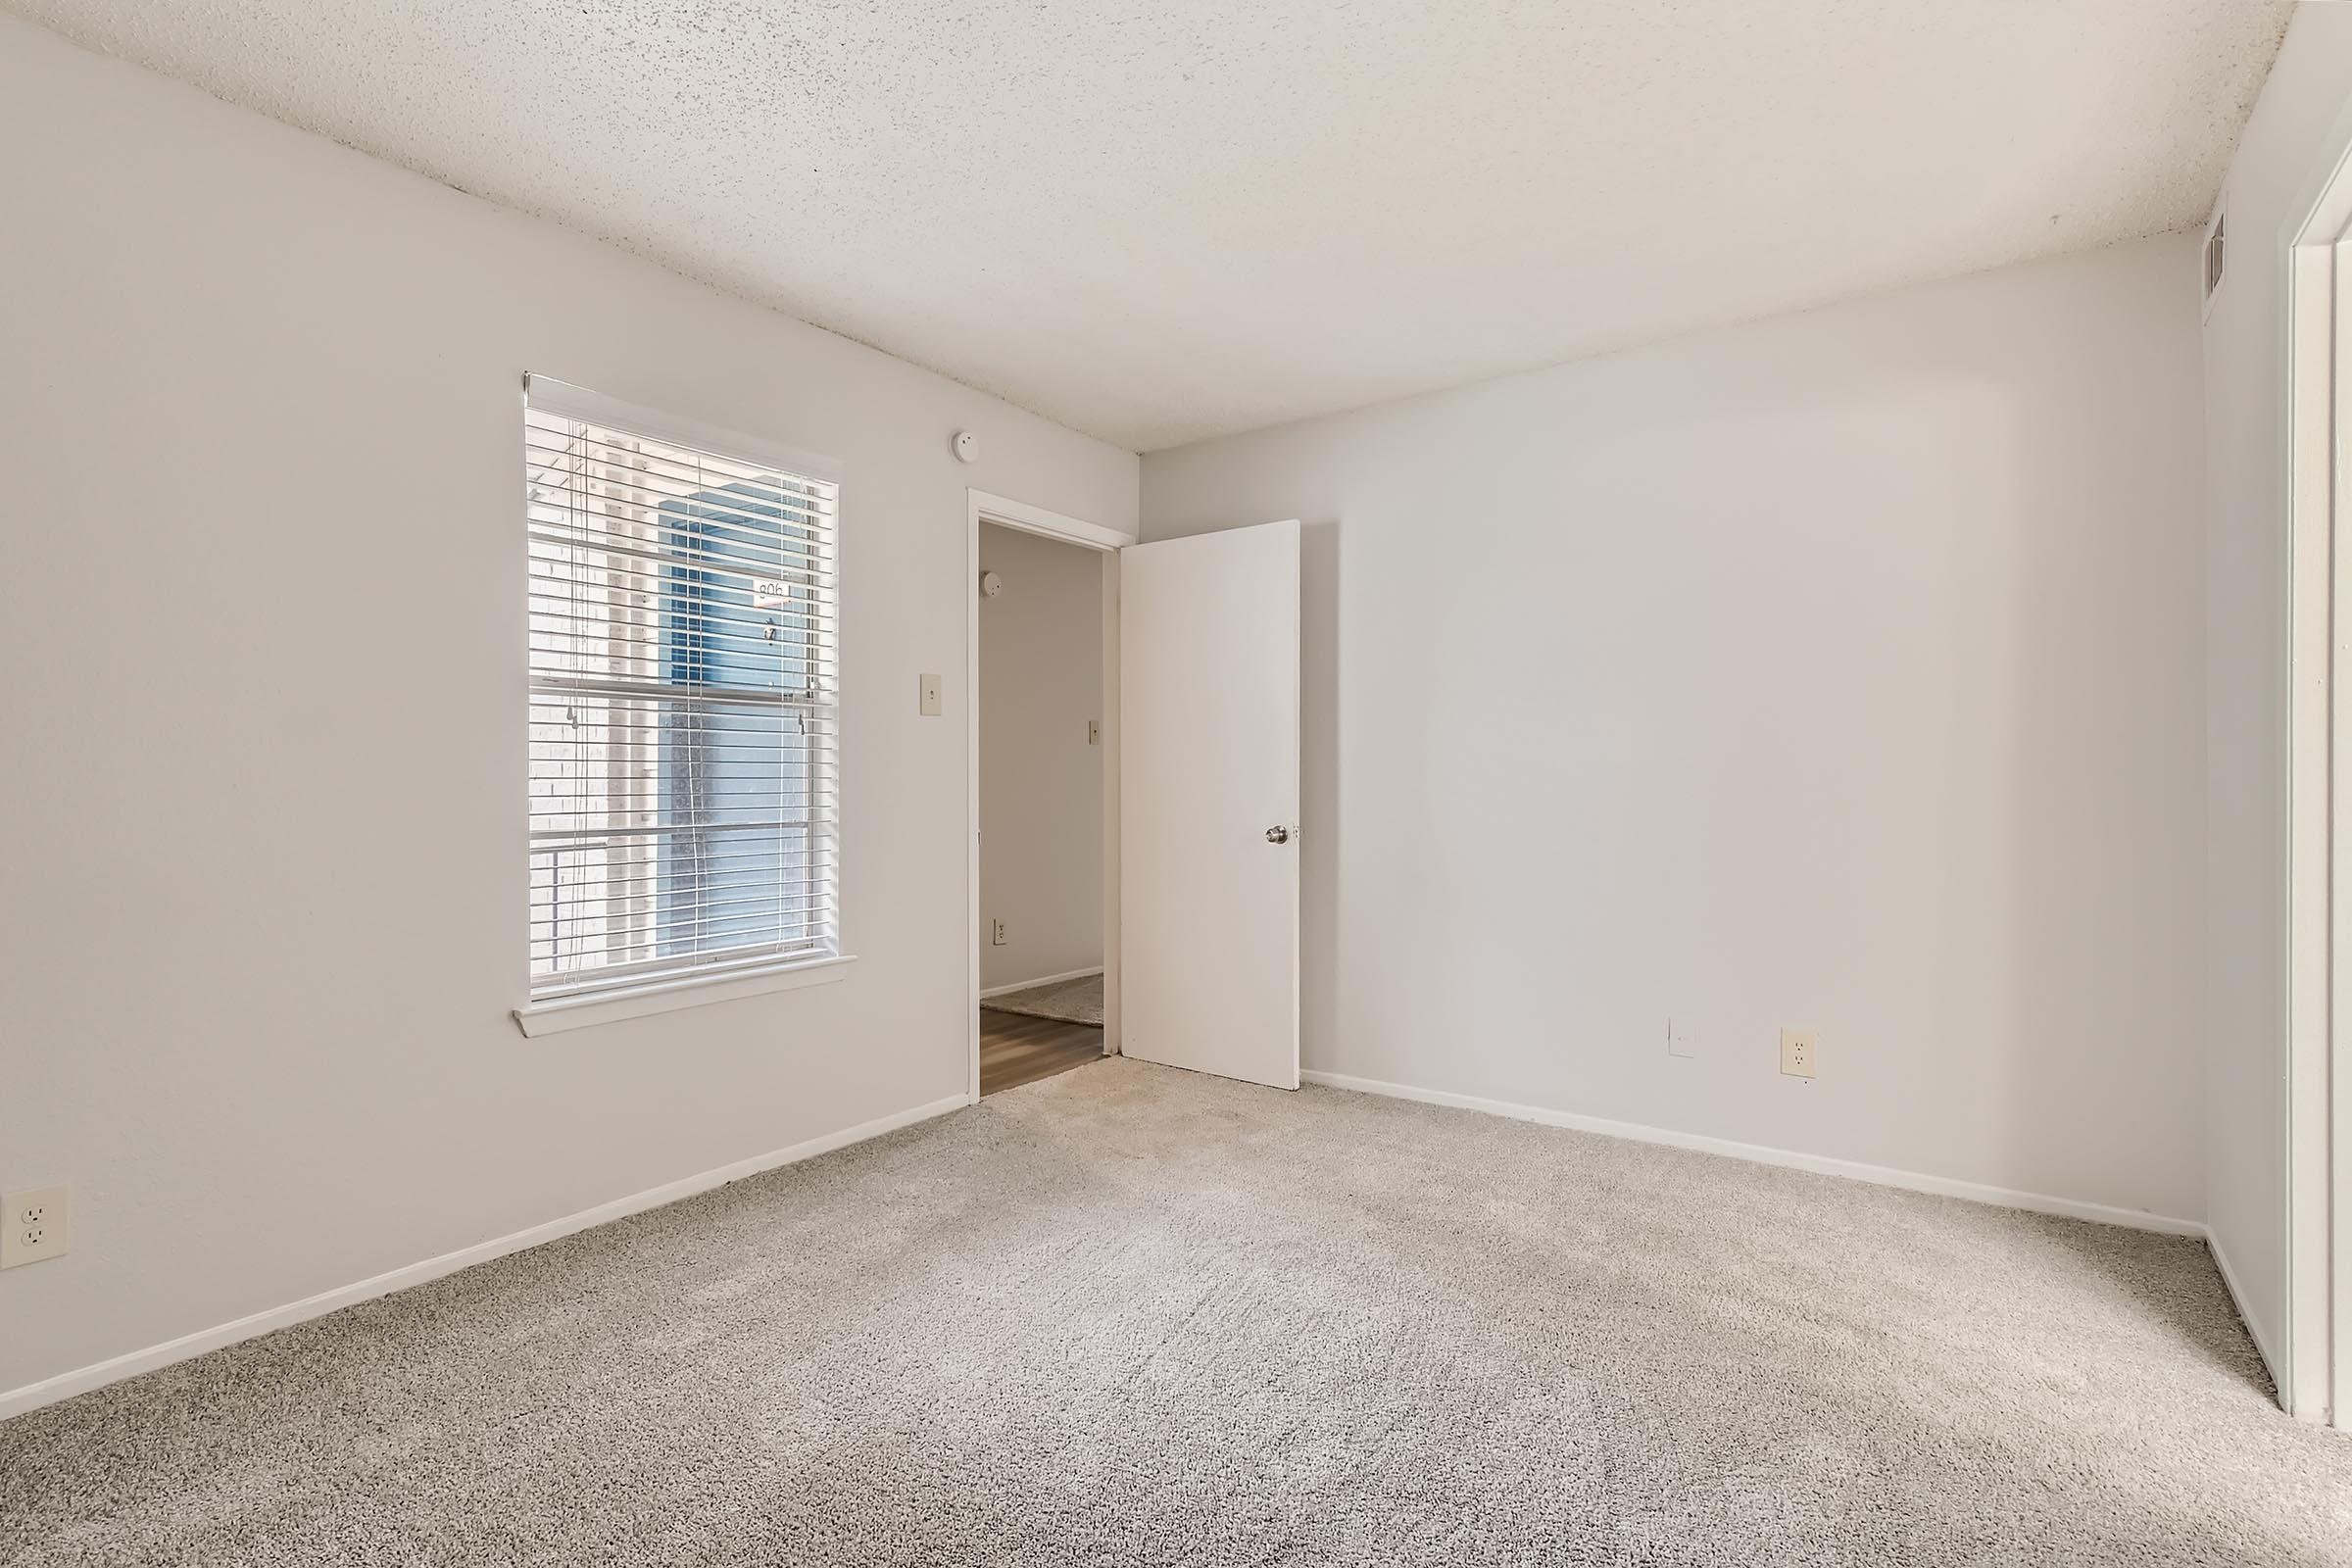 A carpeted bedroom with a large window at Rise North Arlington apartments.